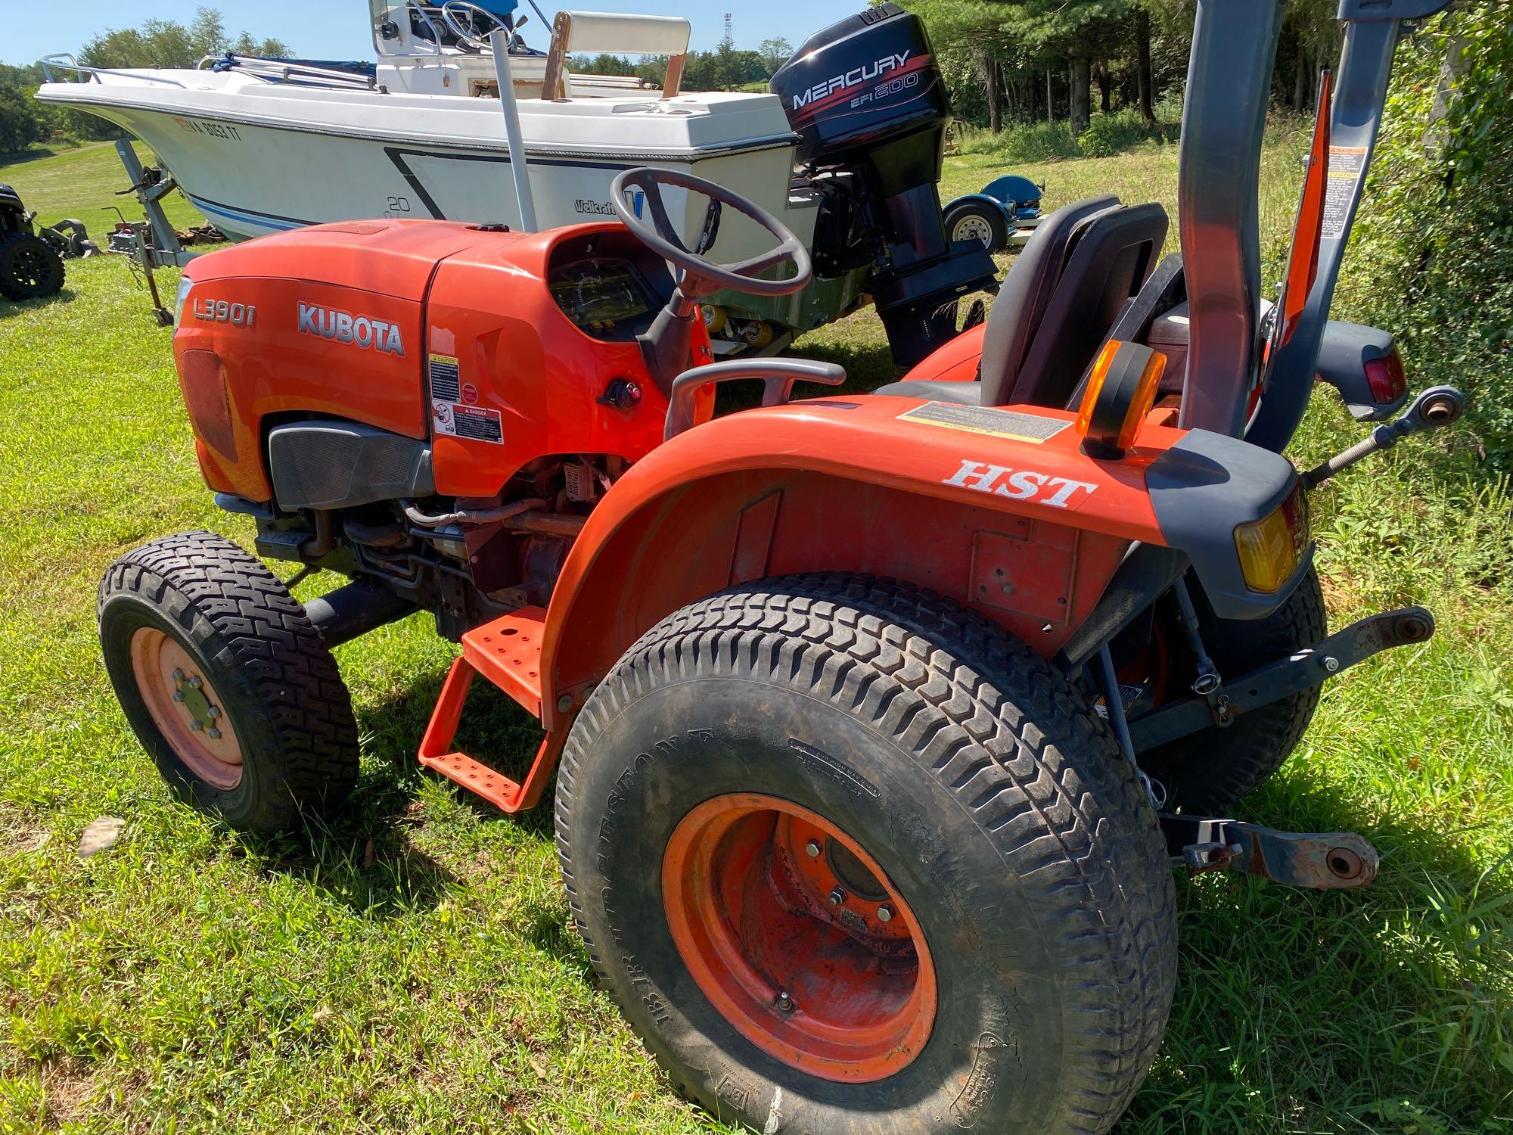 Image for Kubota L3901 4WD Tractor, Has Engine Issue Per Seller, Water In Oil, Low Hours On Tractor